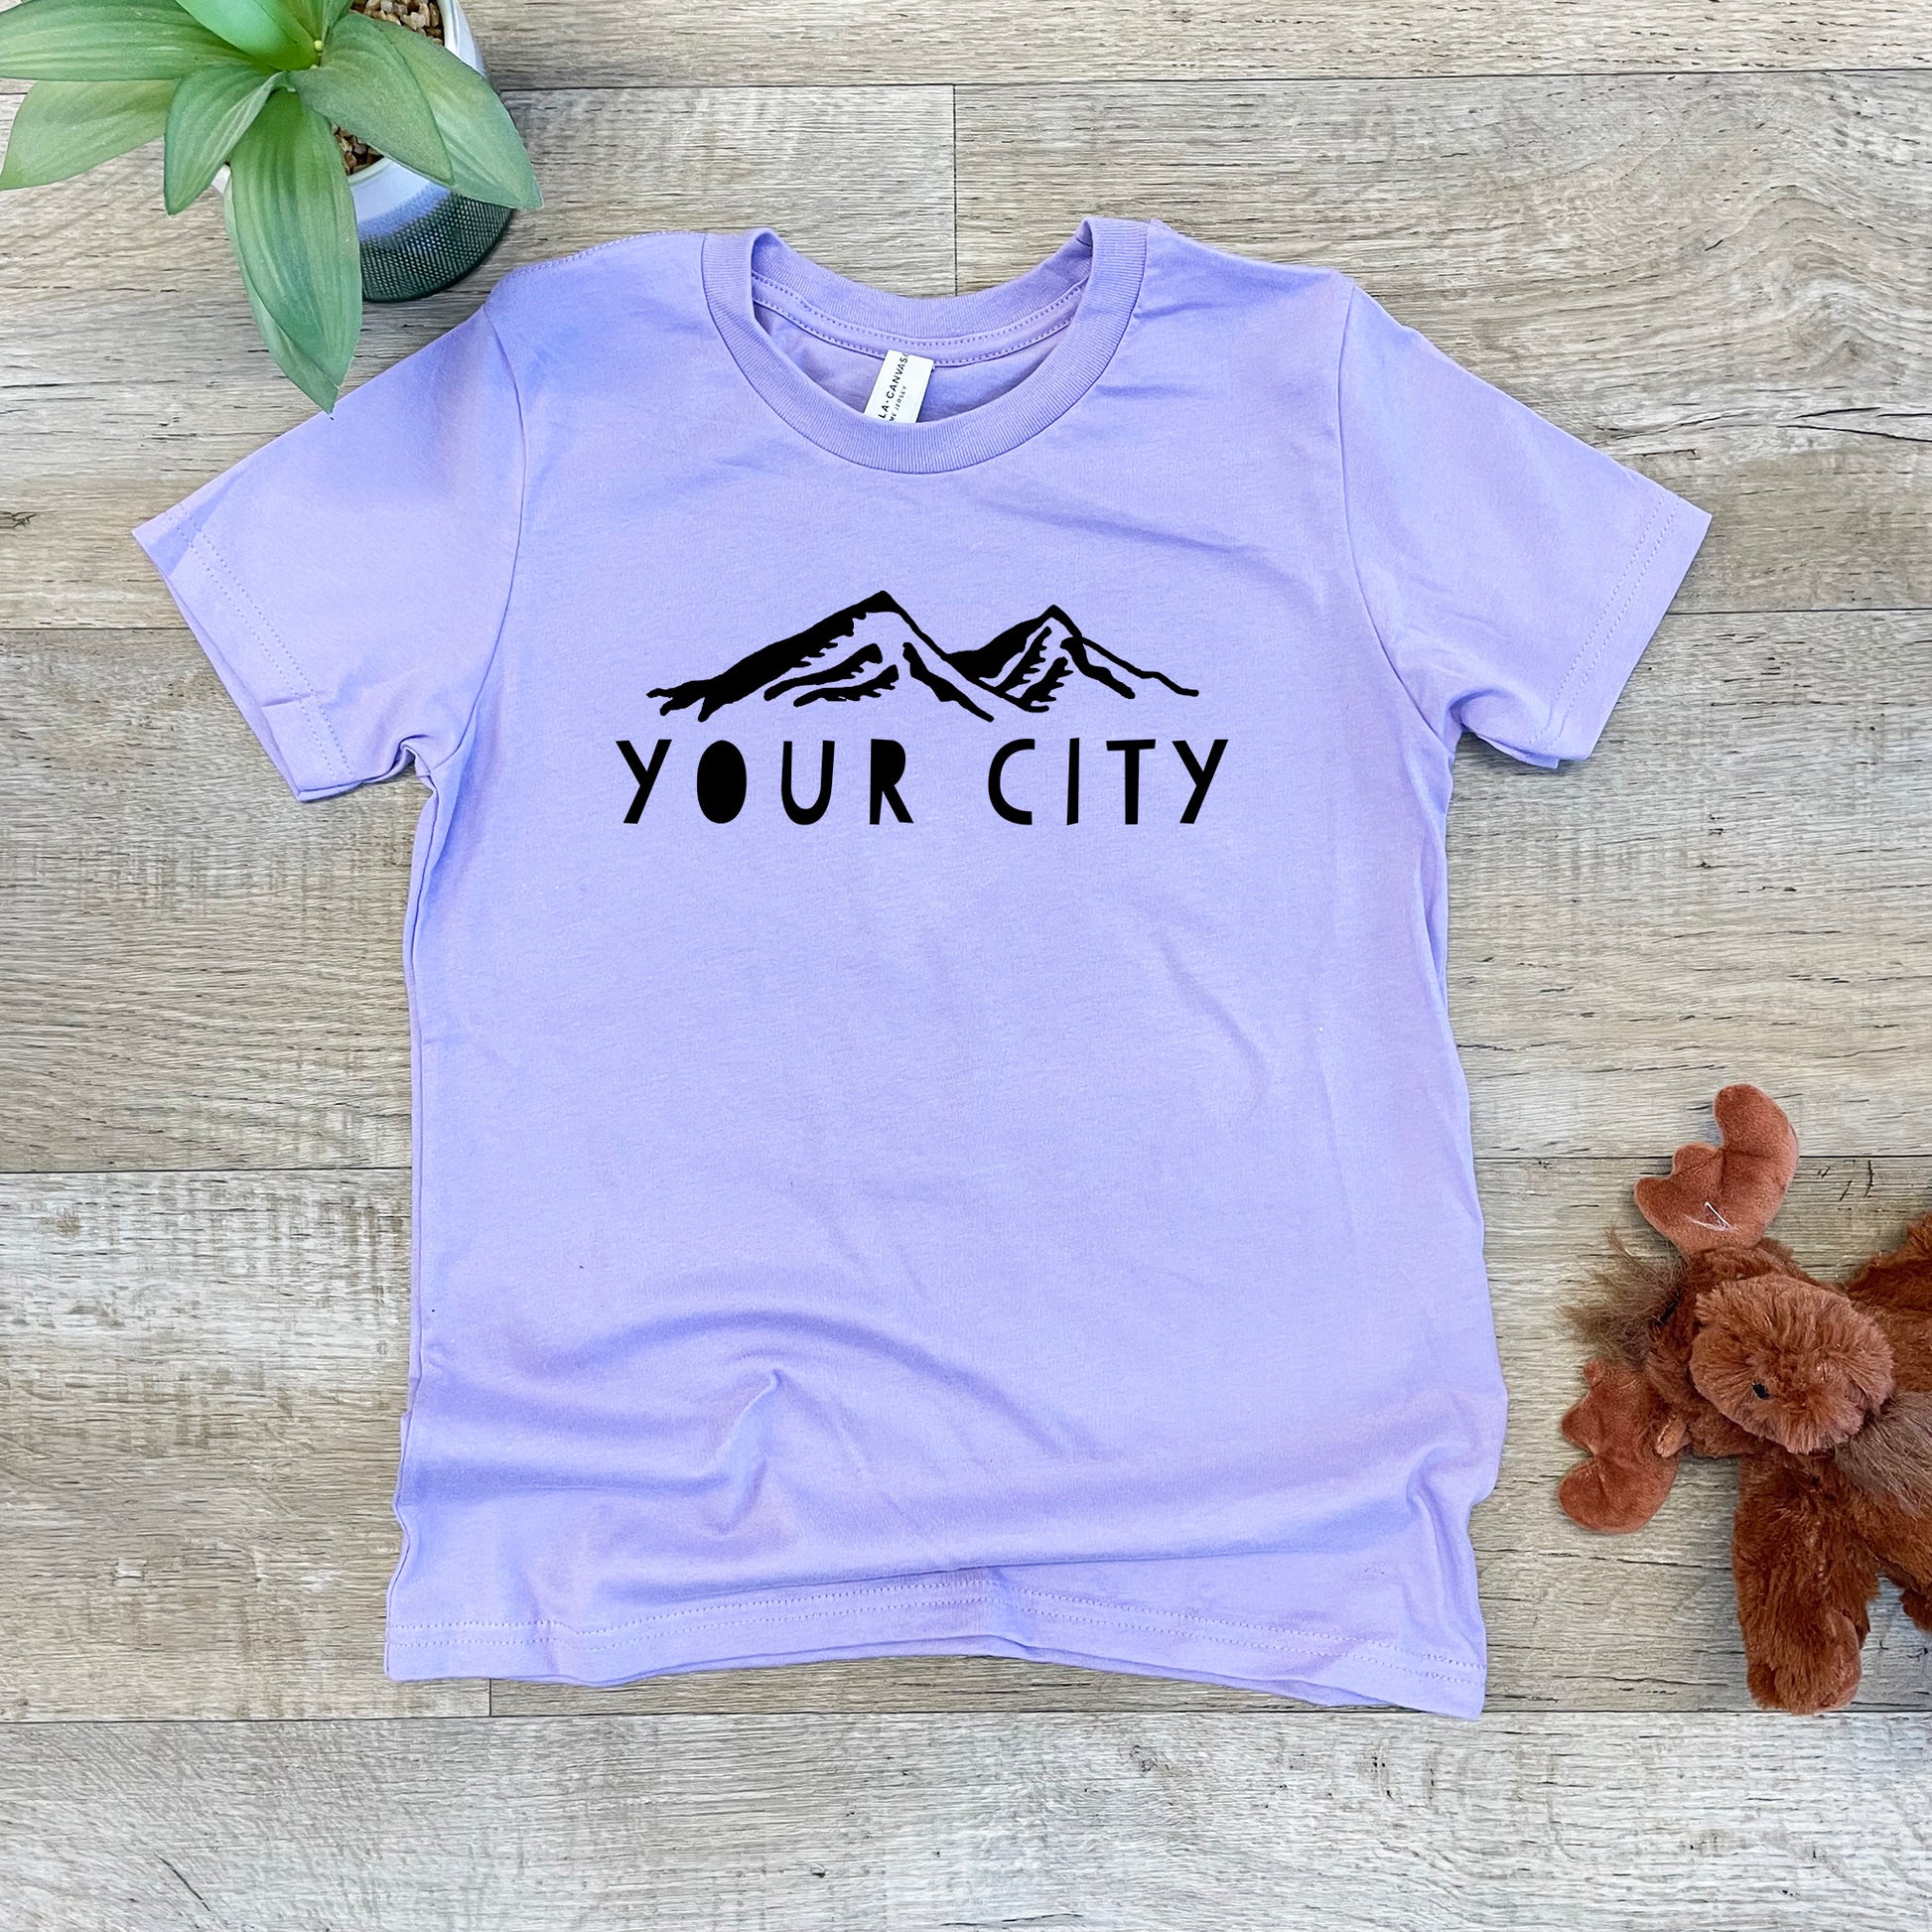 a t - shirt that says your city next to a teddy bear